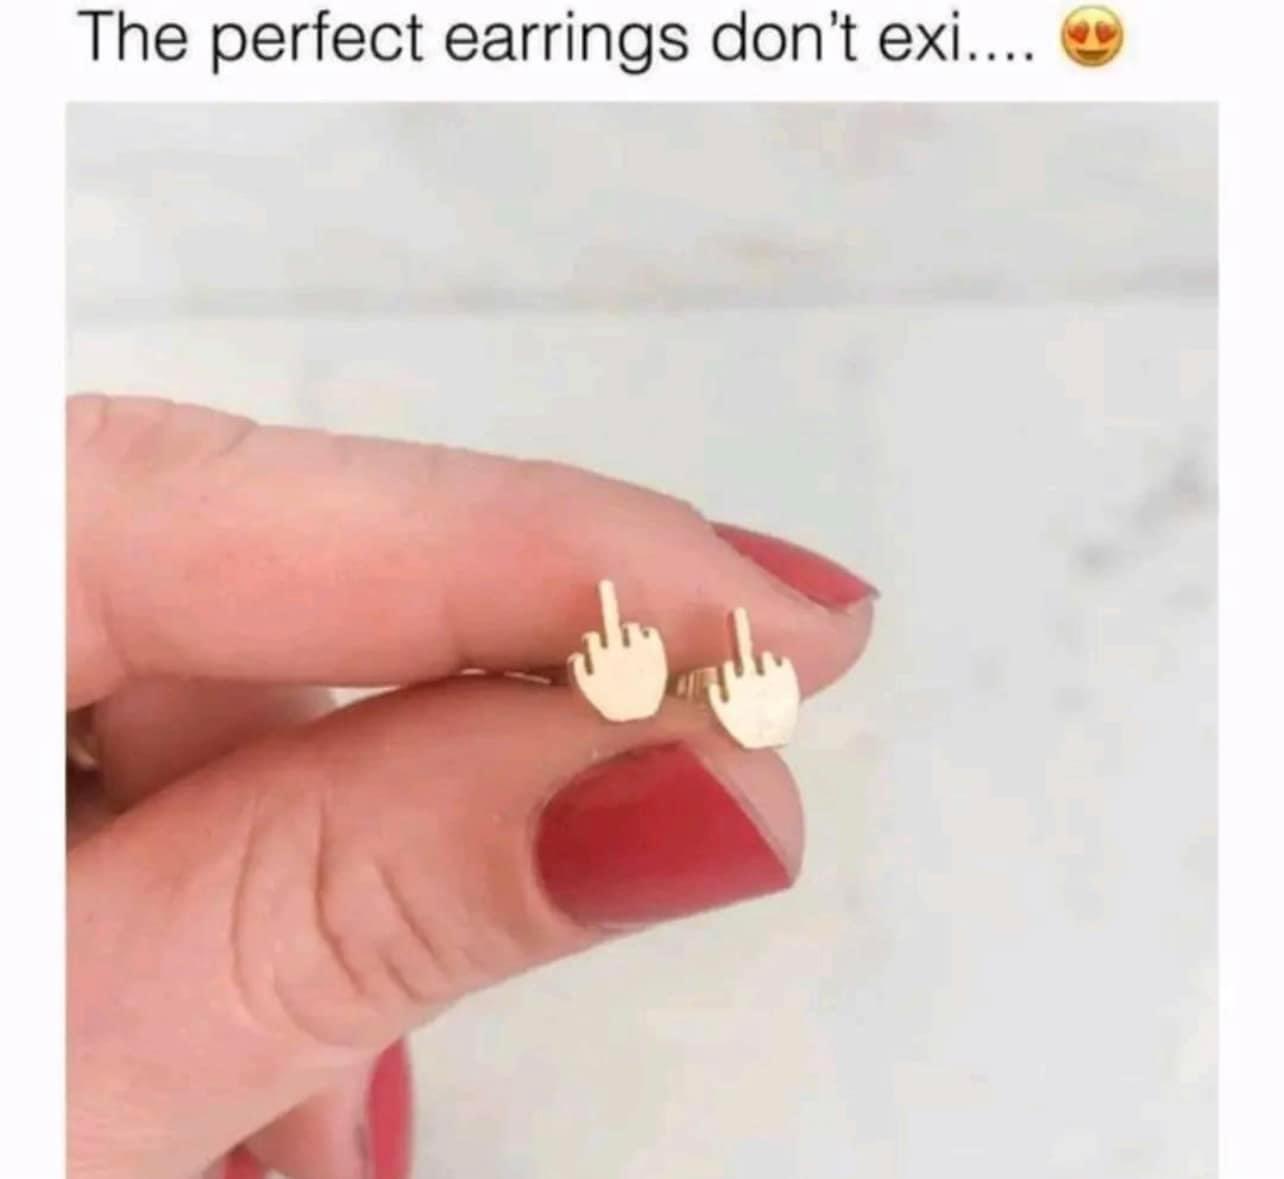 monday morning randomness - nail - The perfect earrings don't exi....